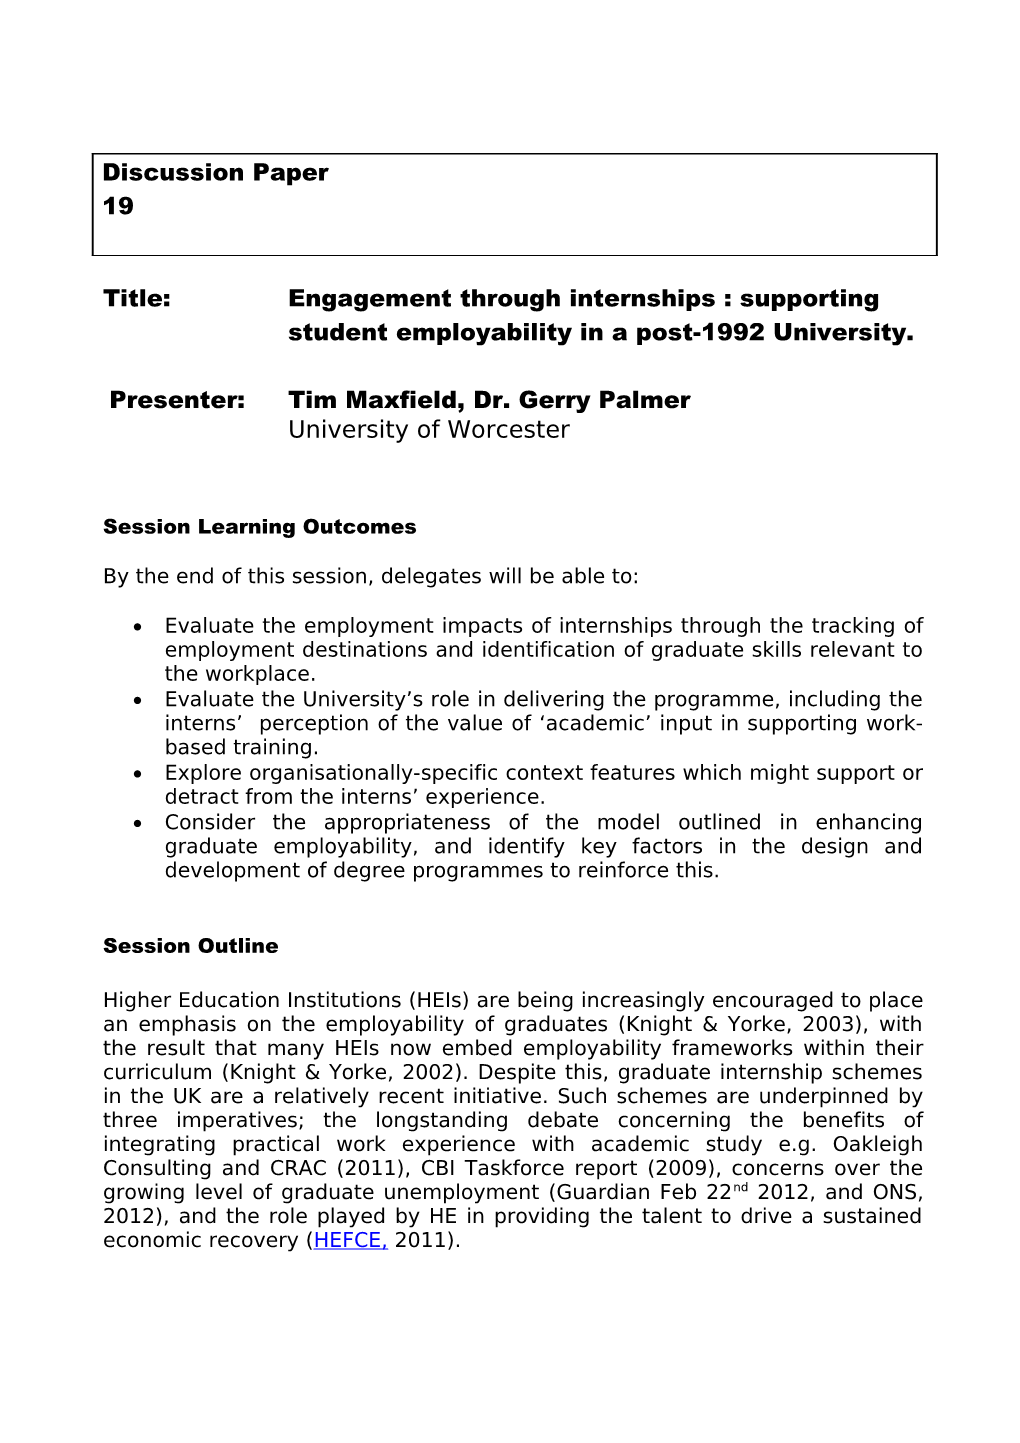 Title: Engagement Through Internships : Supporting Student Employability in a Post-1992